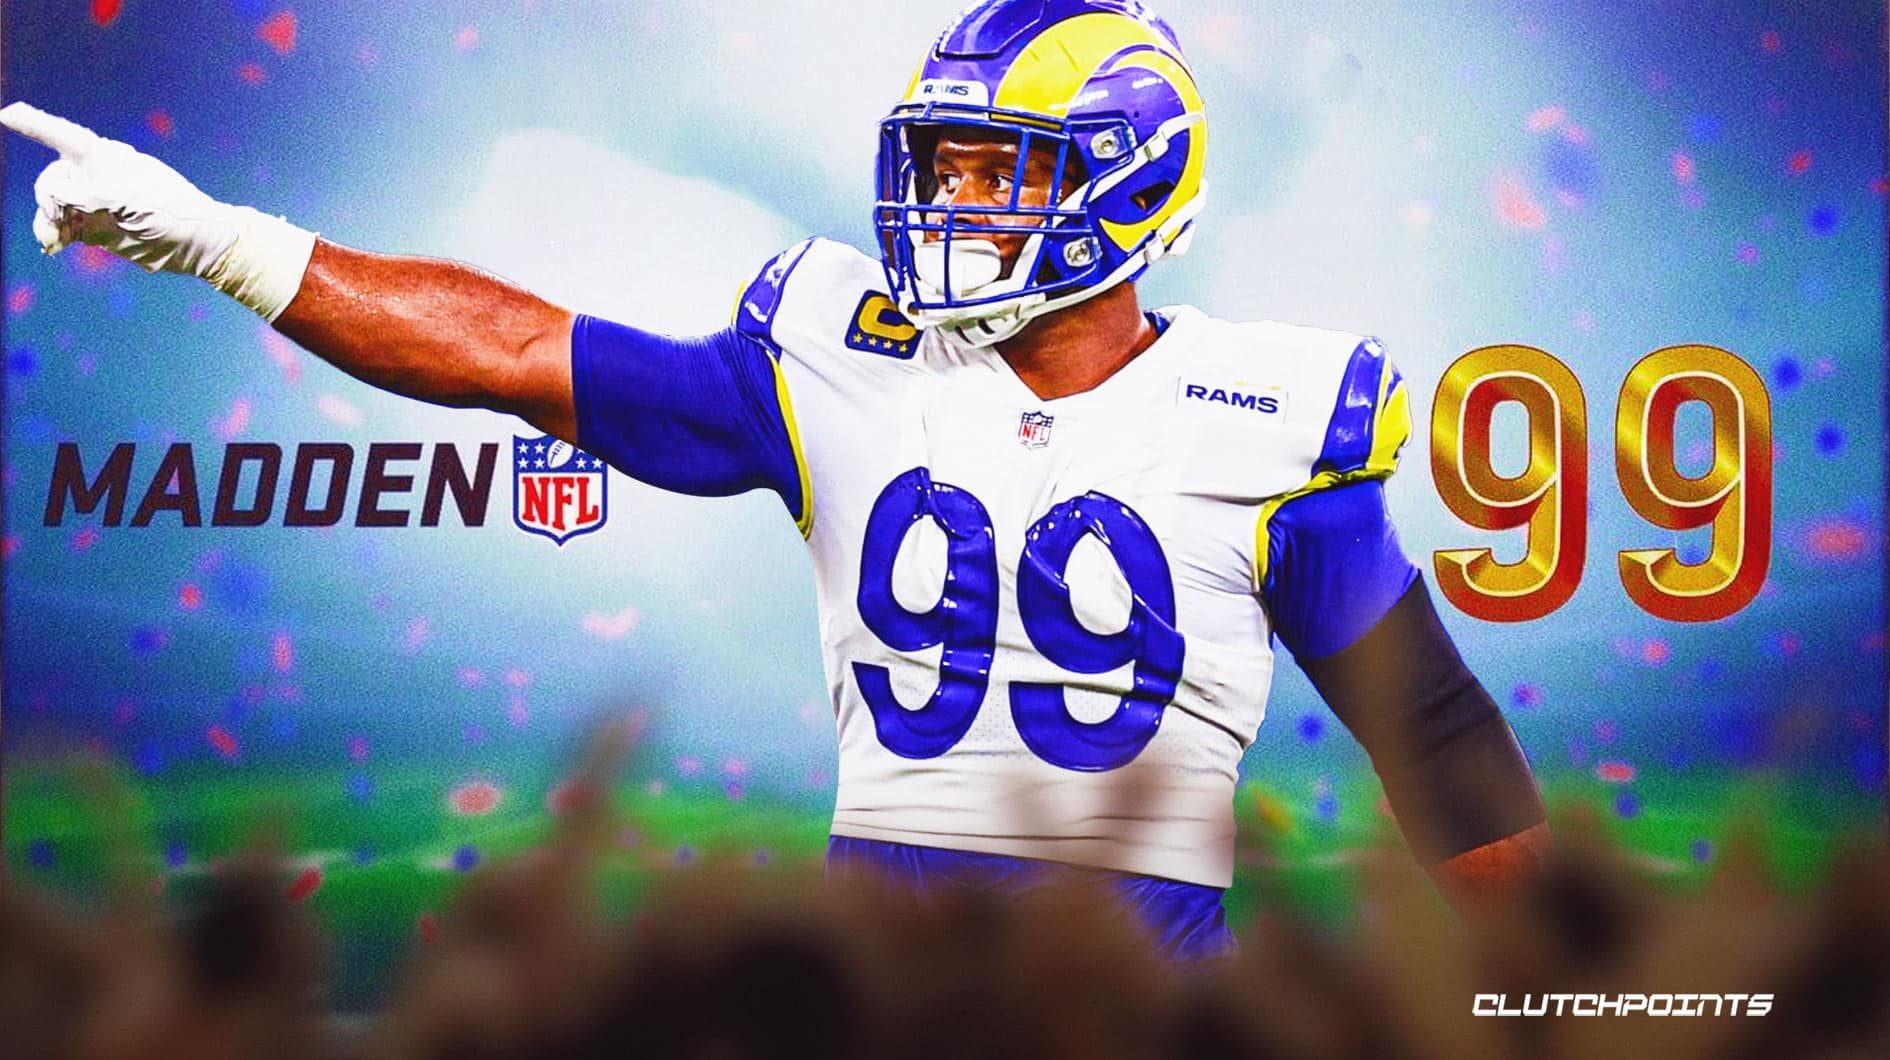 Rams' Aaron Donald makes history with 7th Madden 99 rating